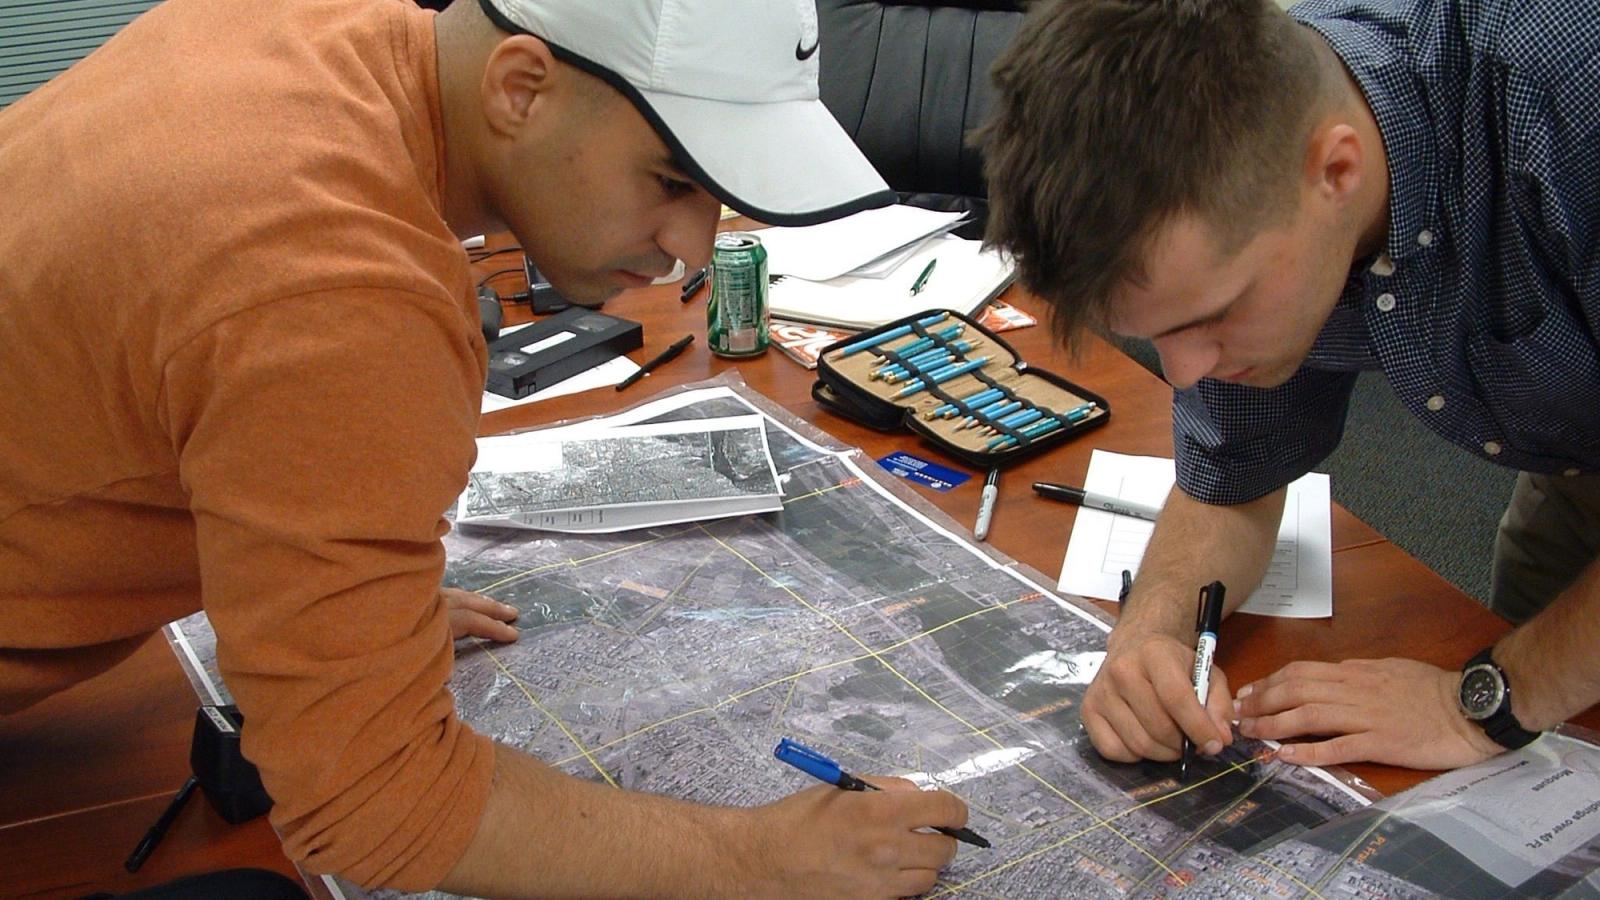 Two men stand over a map on a table. Pens in hand.